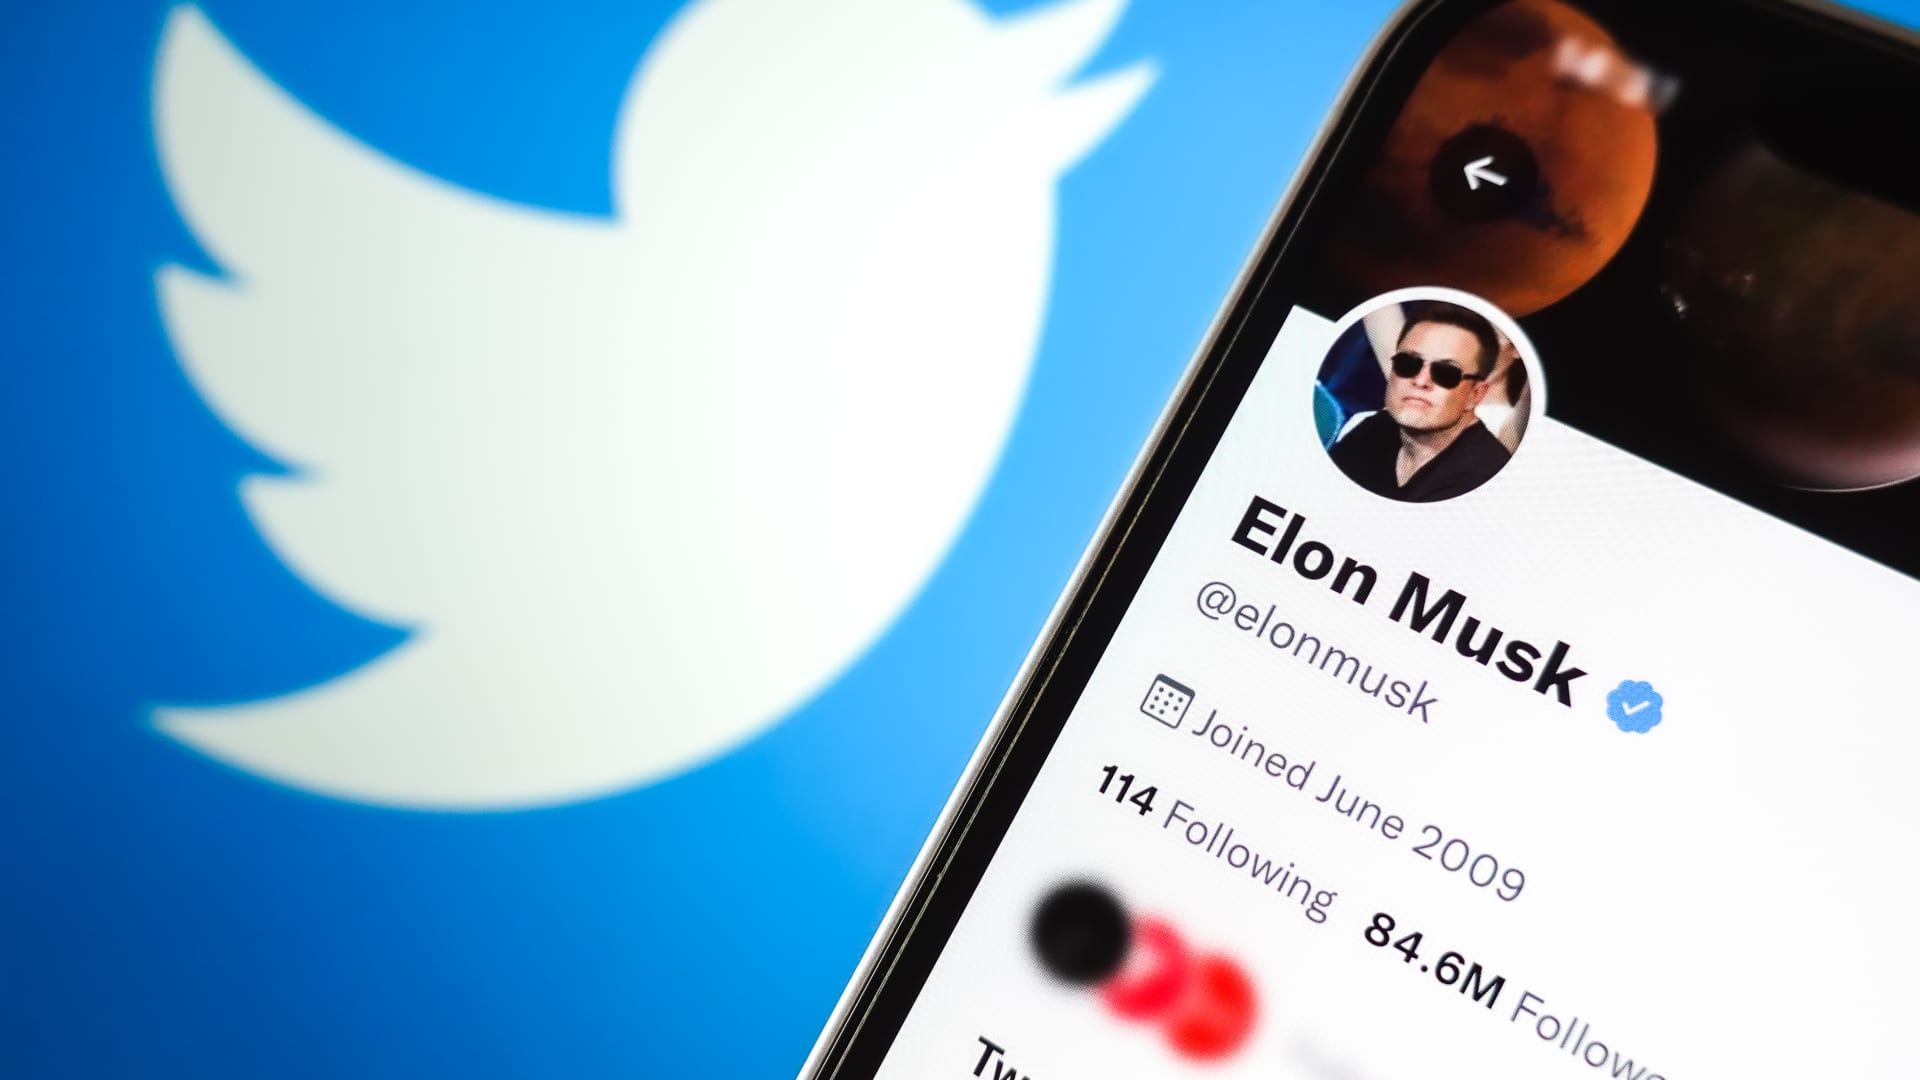 Musk tells Twitter employees they can still receive stock even though the company is private